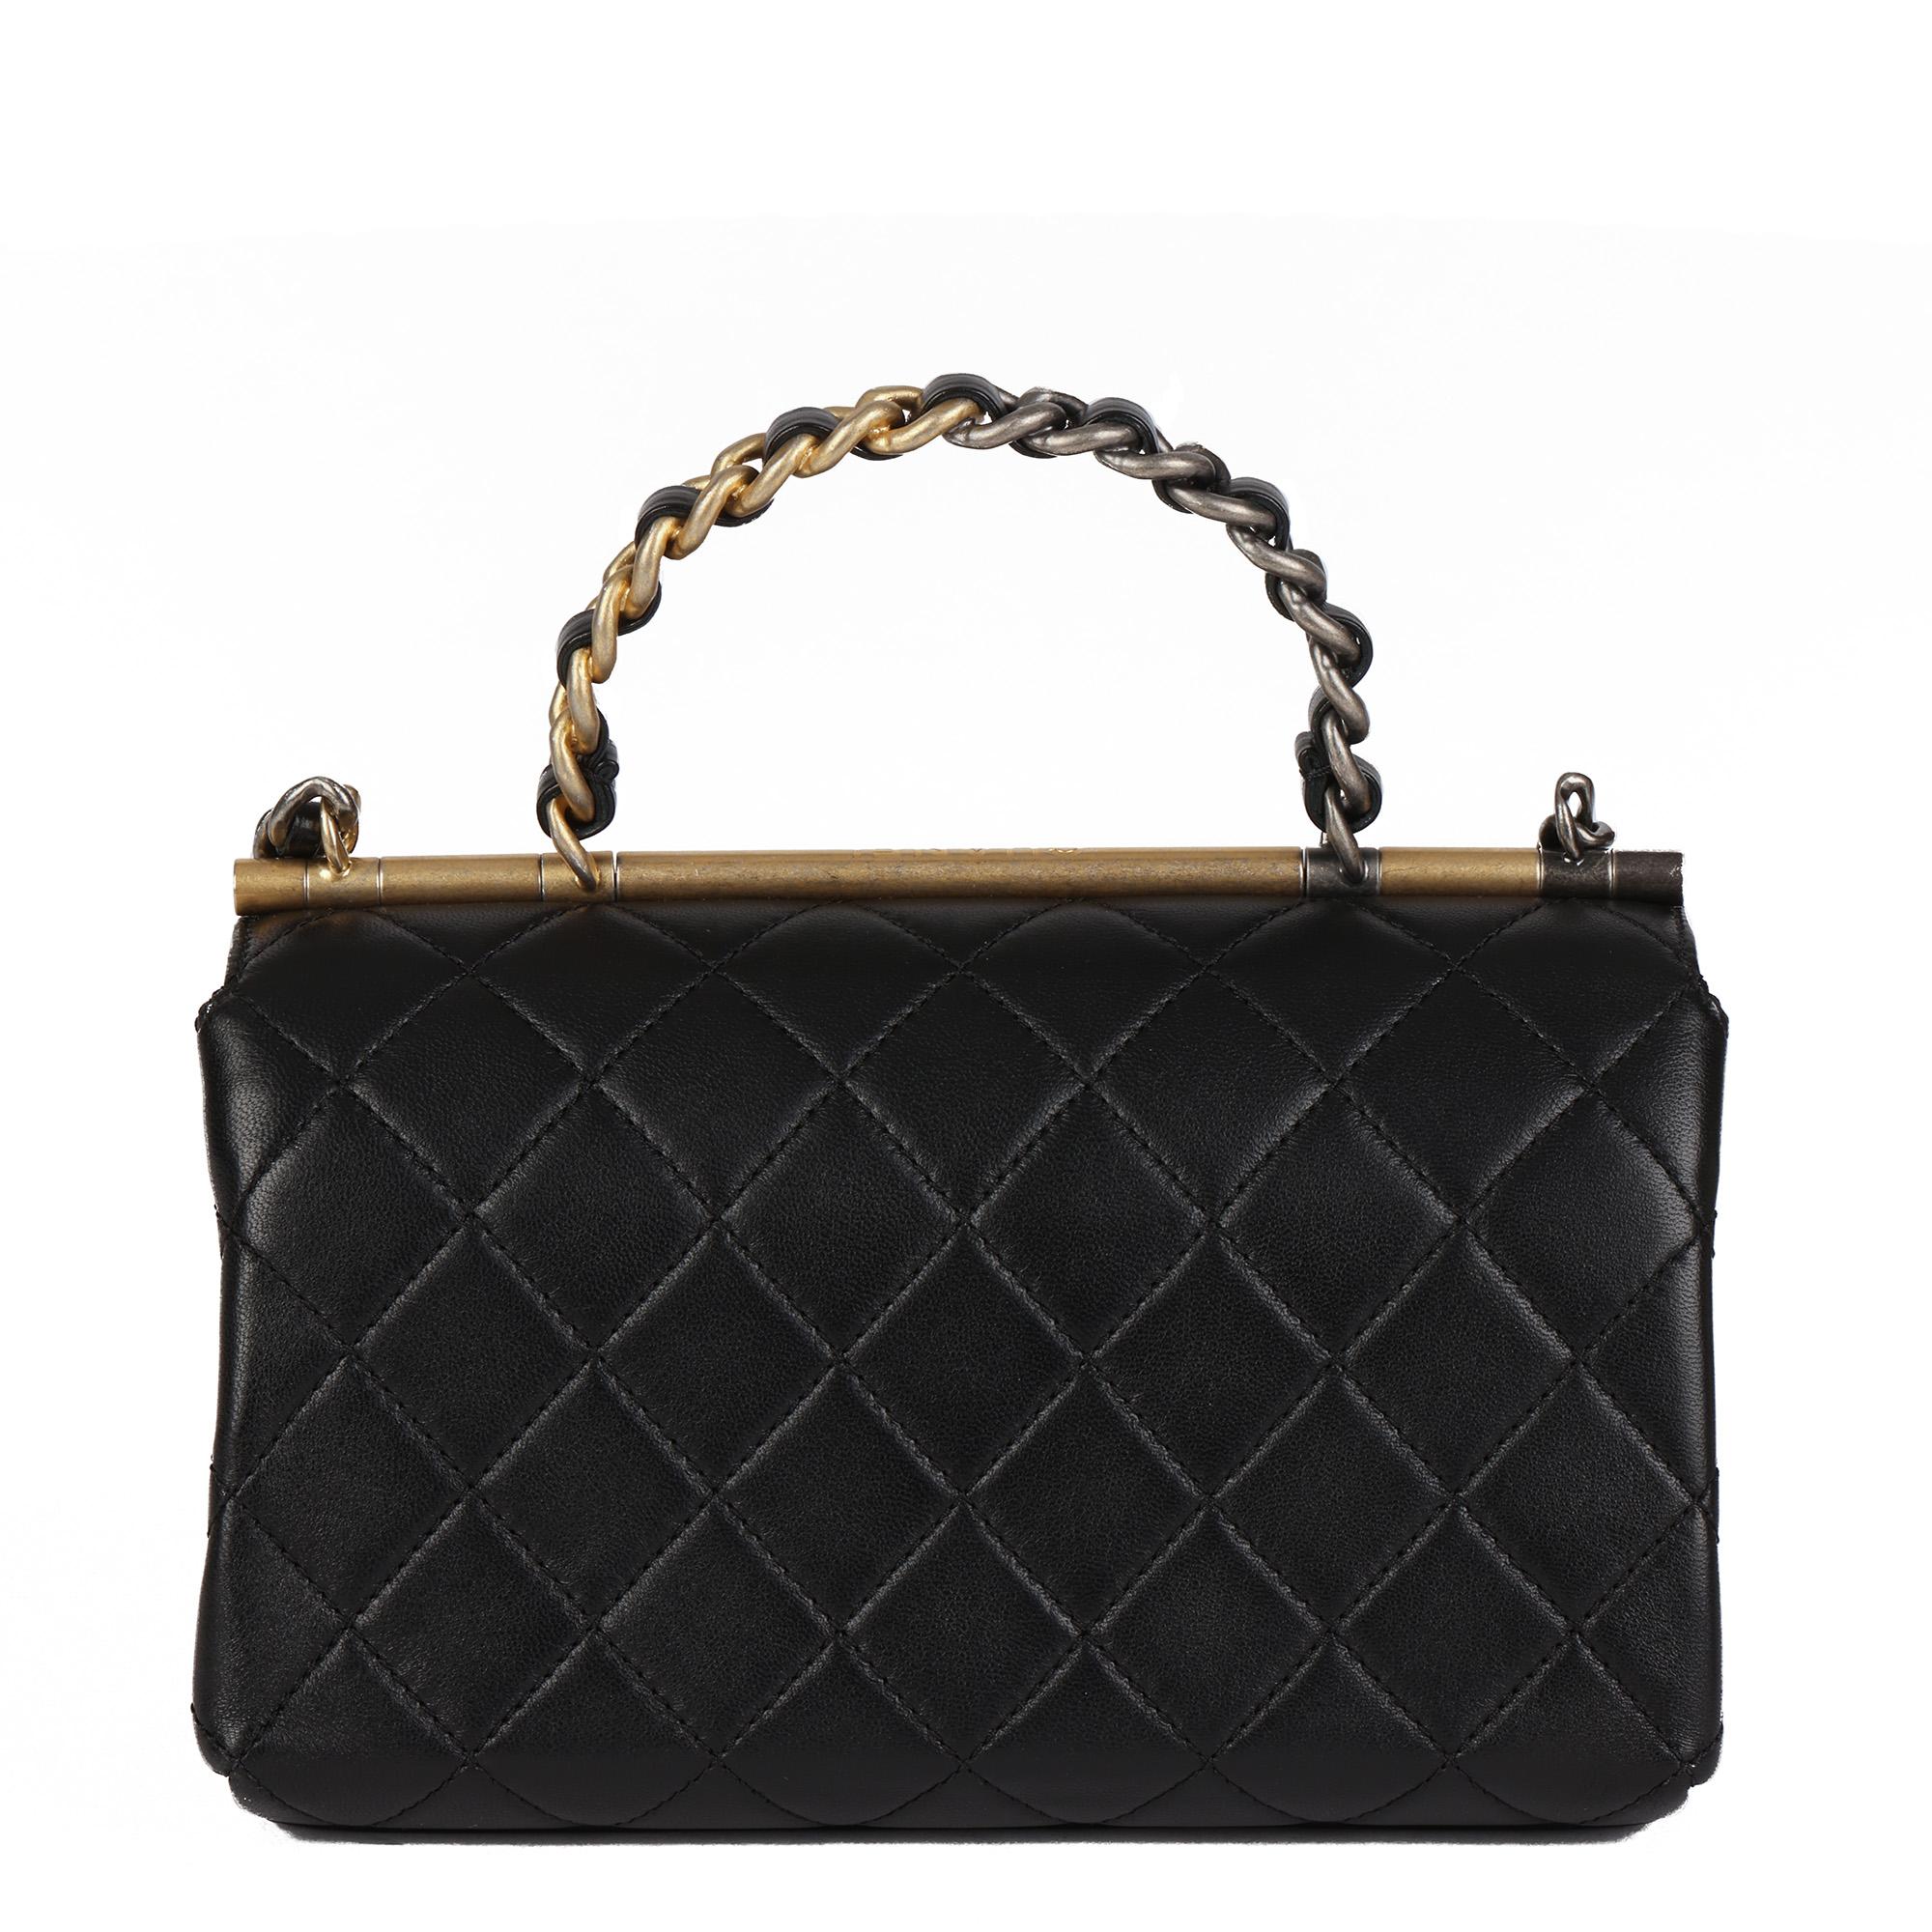 CHANEL Black Quilted Lambskin Leather Small Classic Top Handle Flap Bag 1